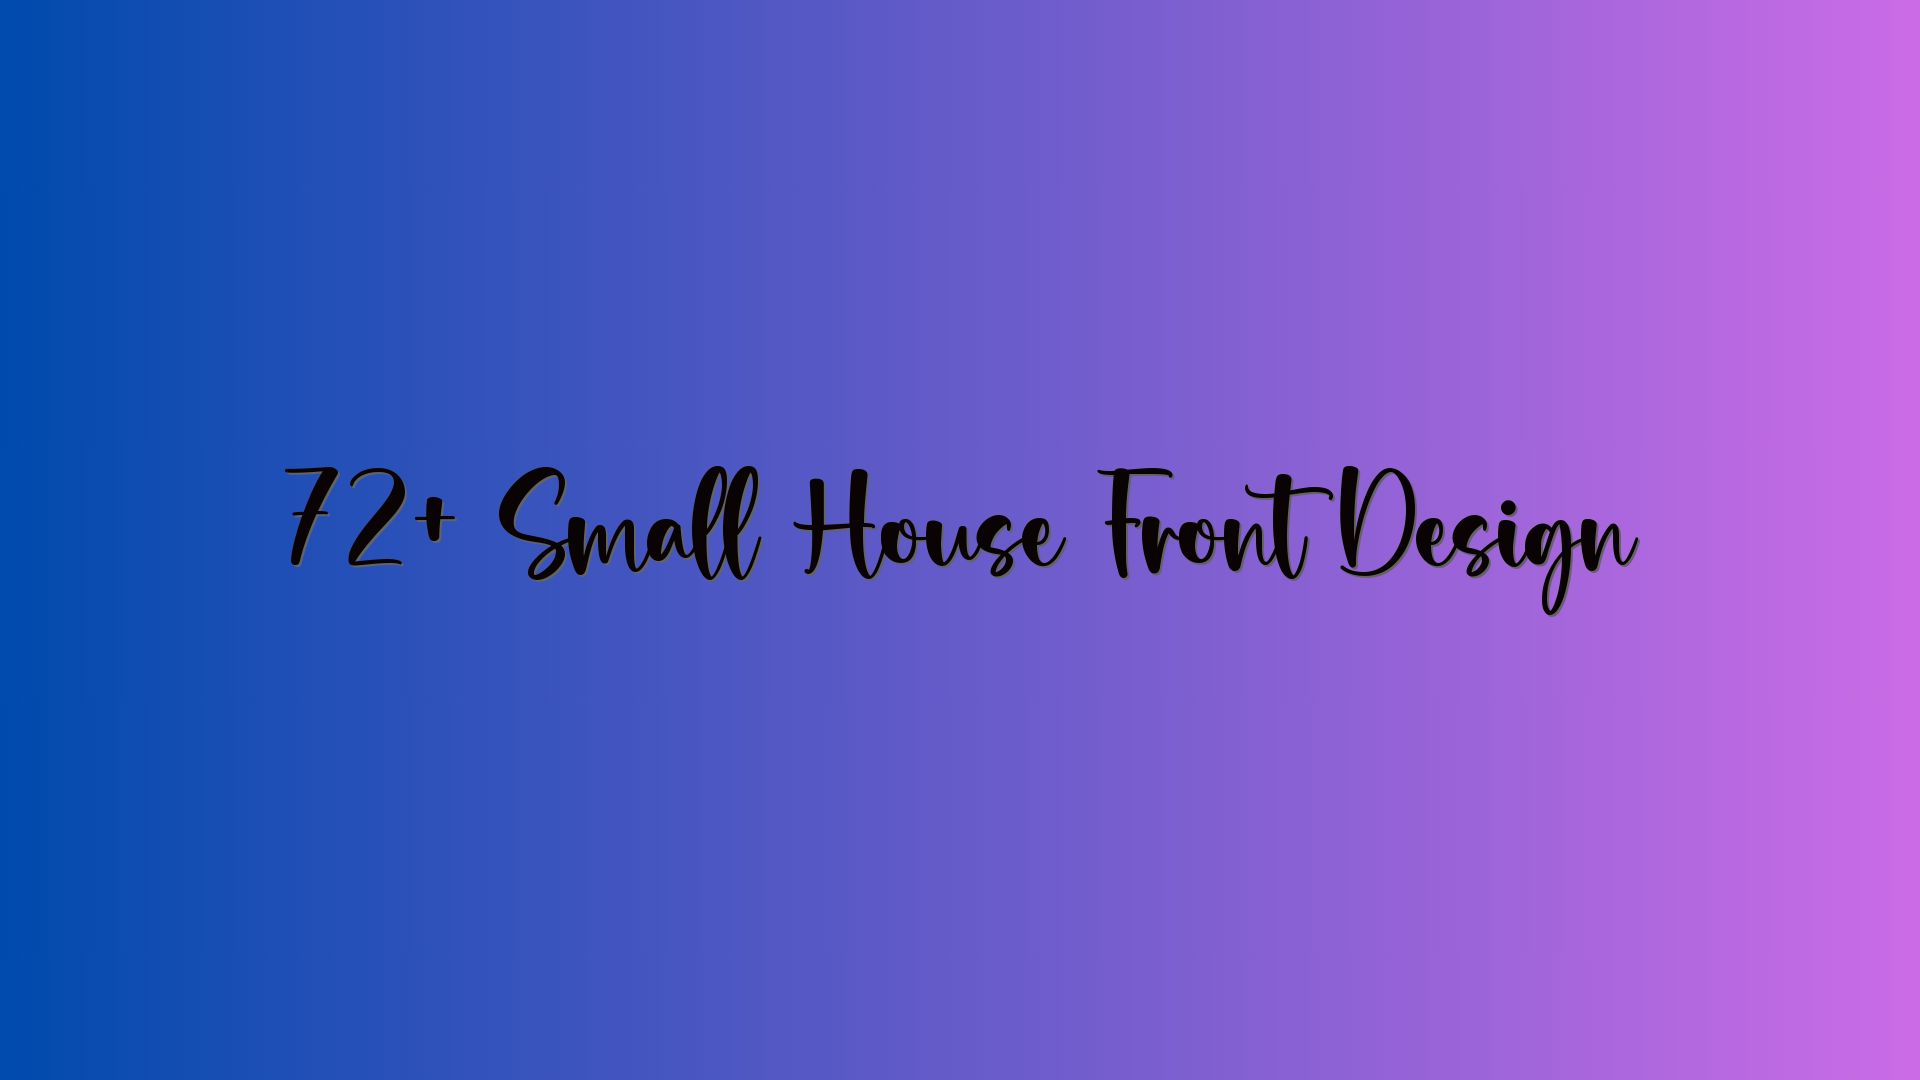 72+ Small House Front Design